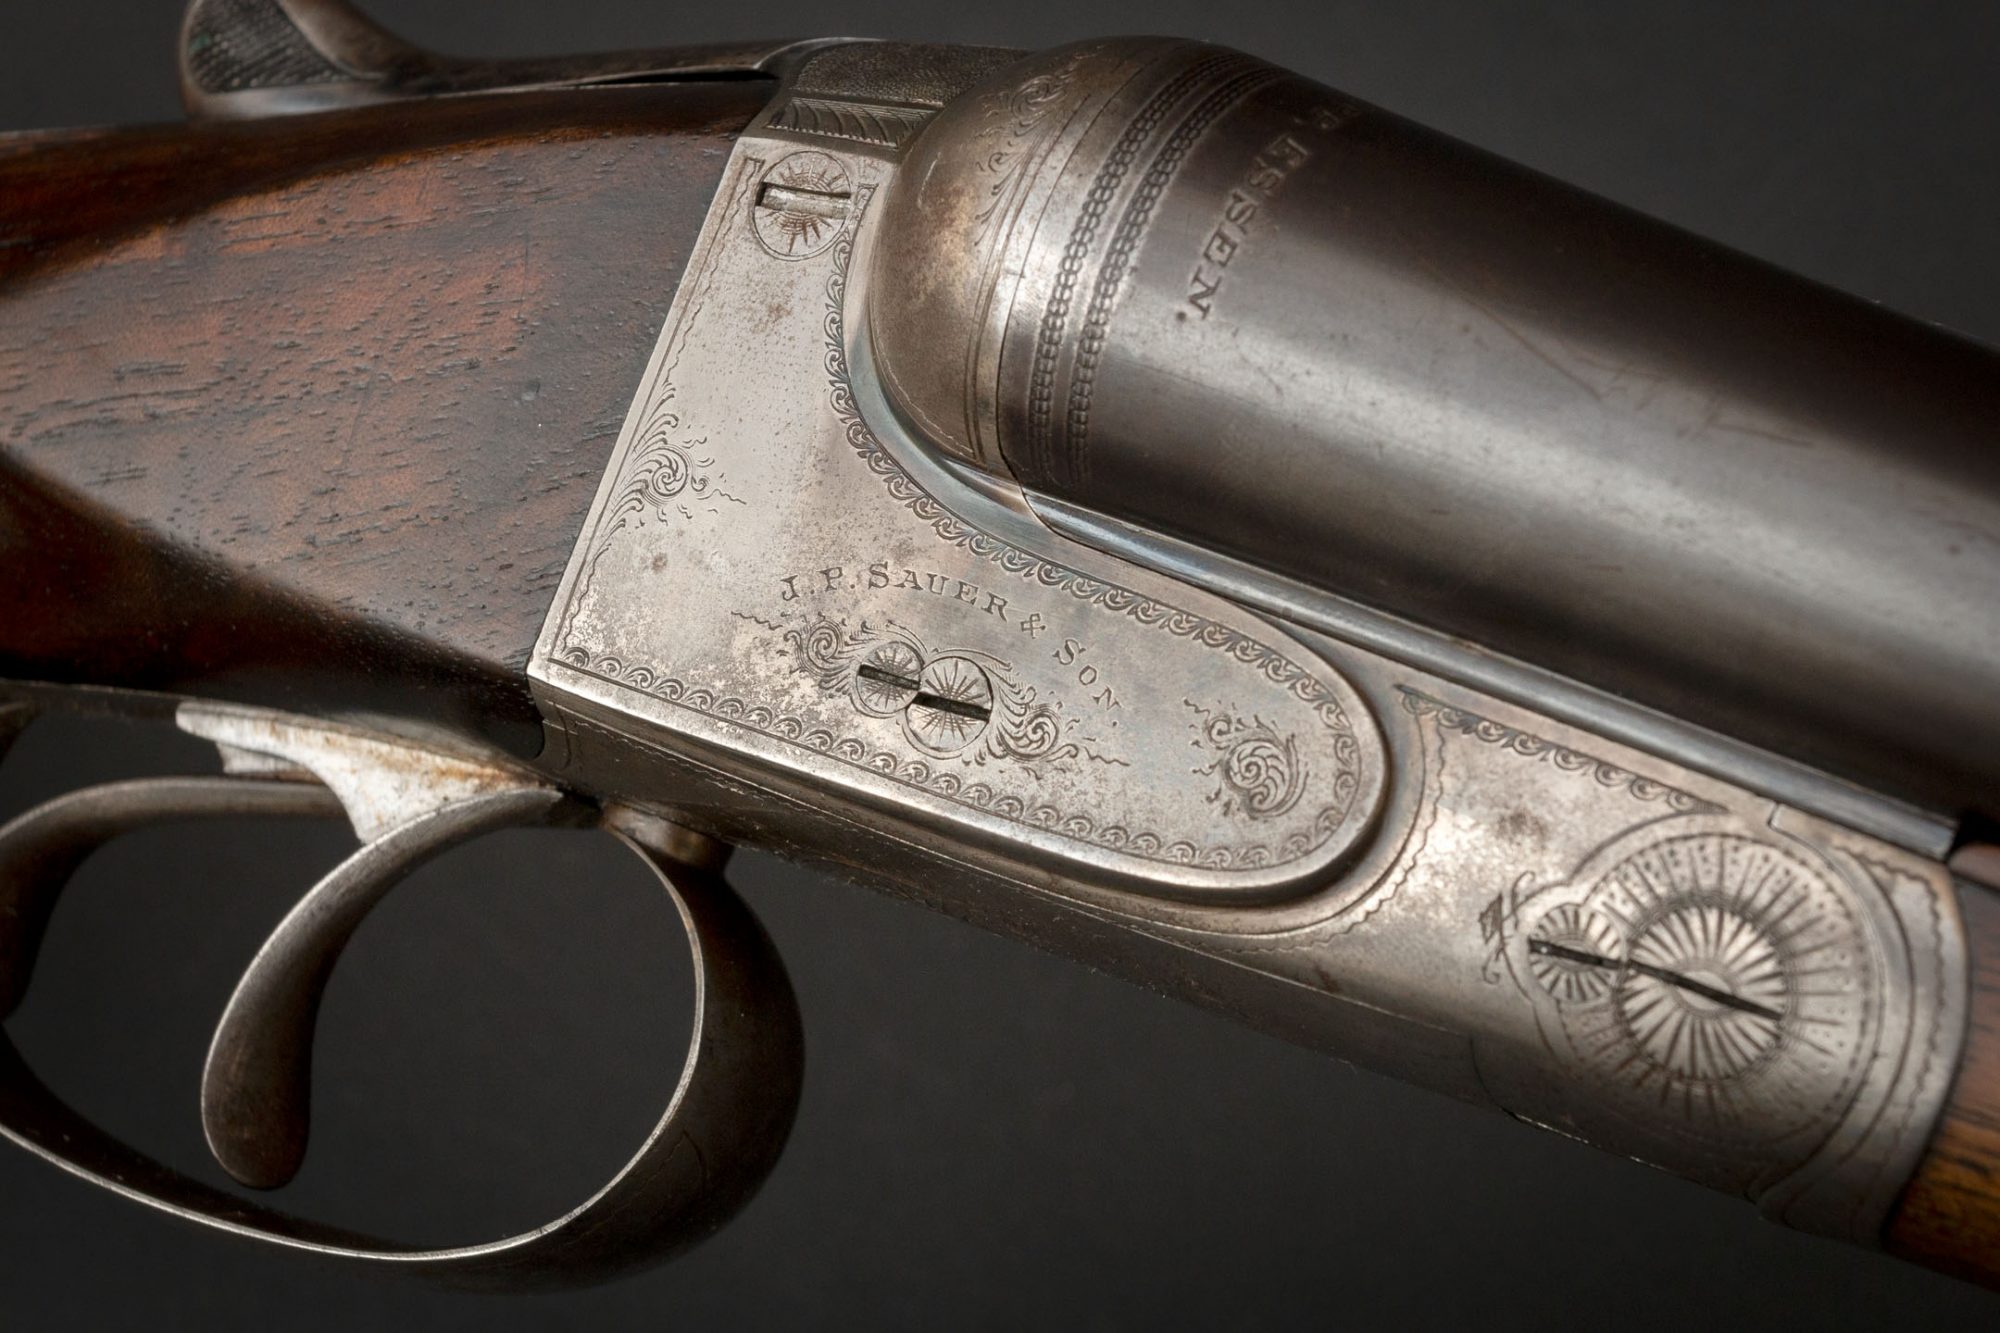 JP Sauer & Son 12 gauge side-by-side shotgun, for sale by Turnbull Restoration of Bloomfield, NY